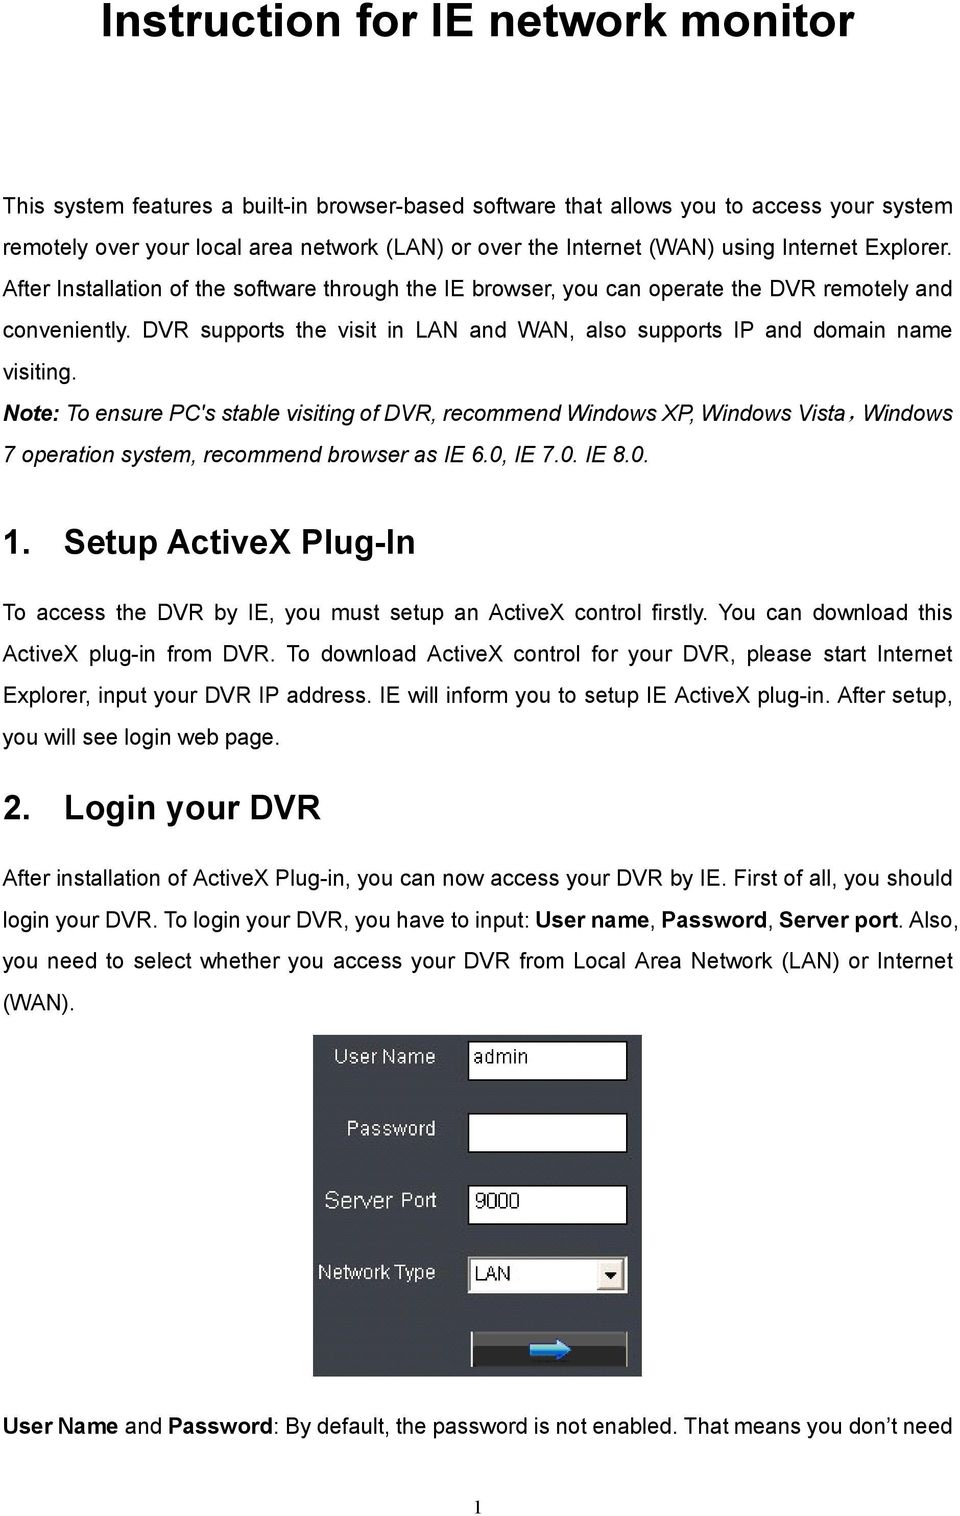 DVR supports the visit in LAN and WAN, also supports IP and domain name visiting.